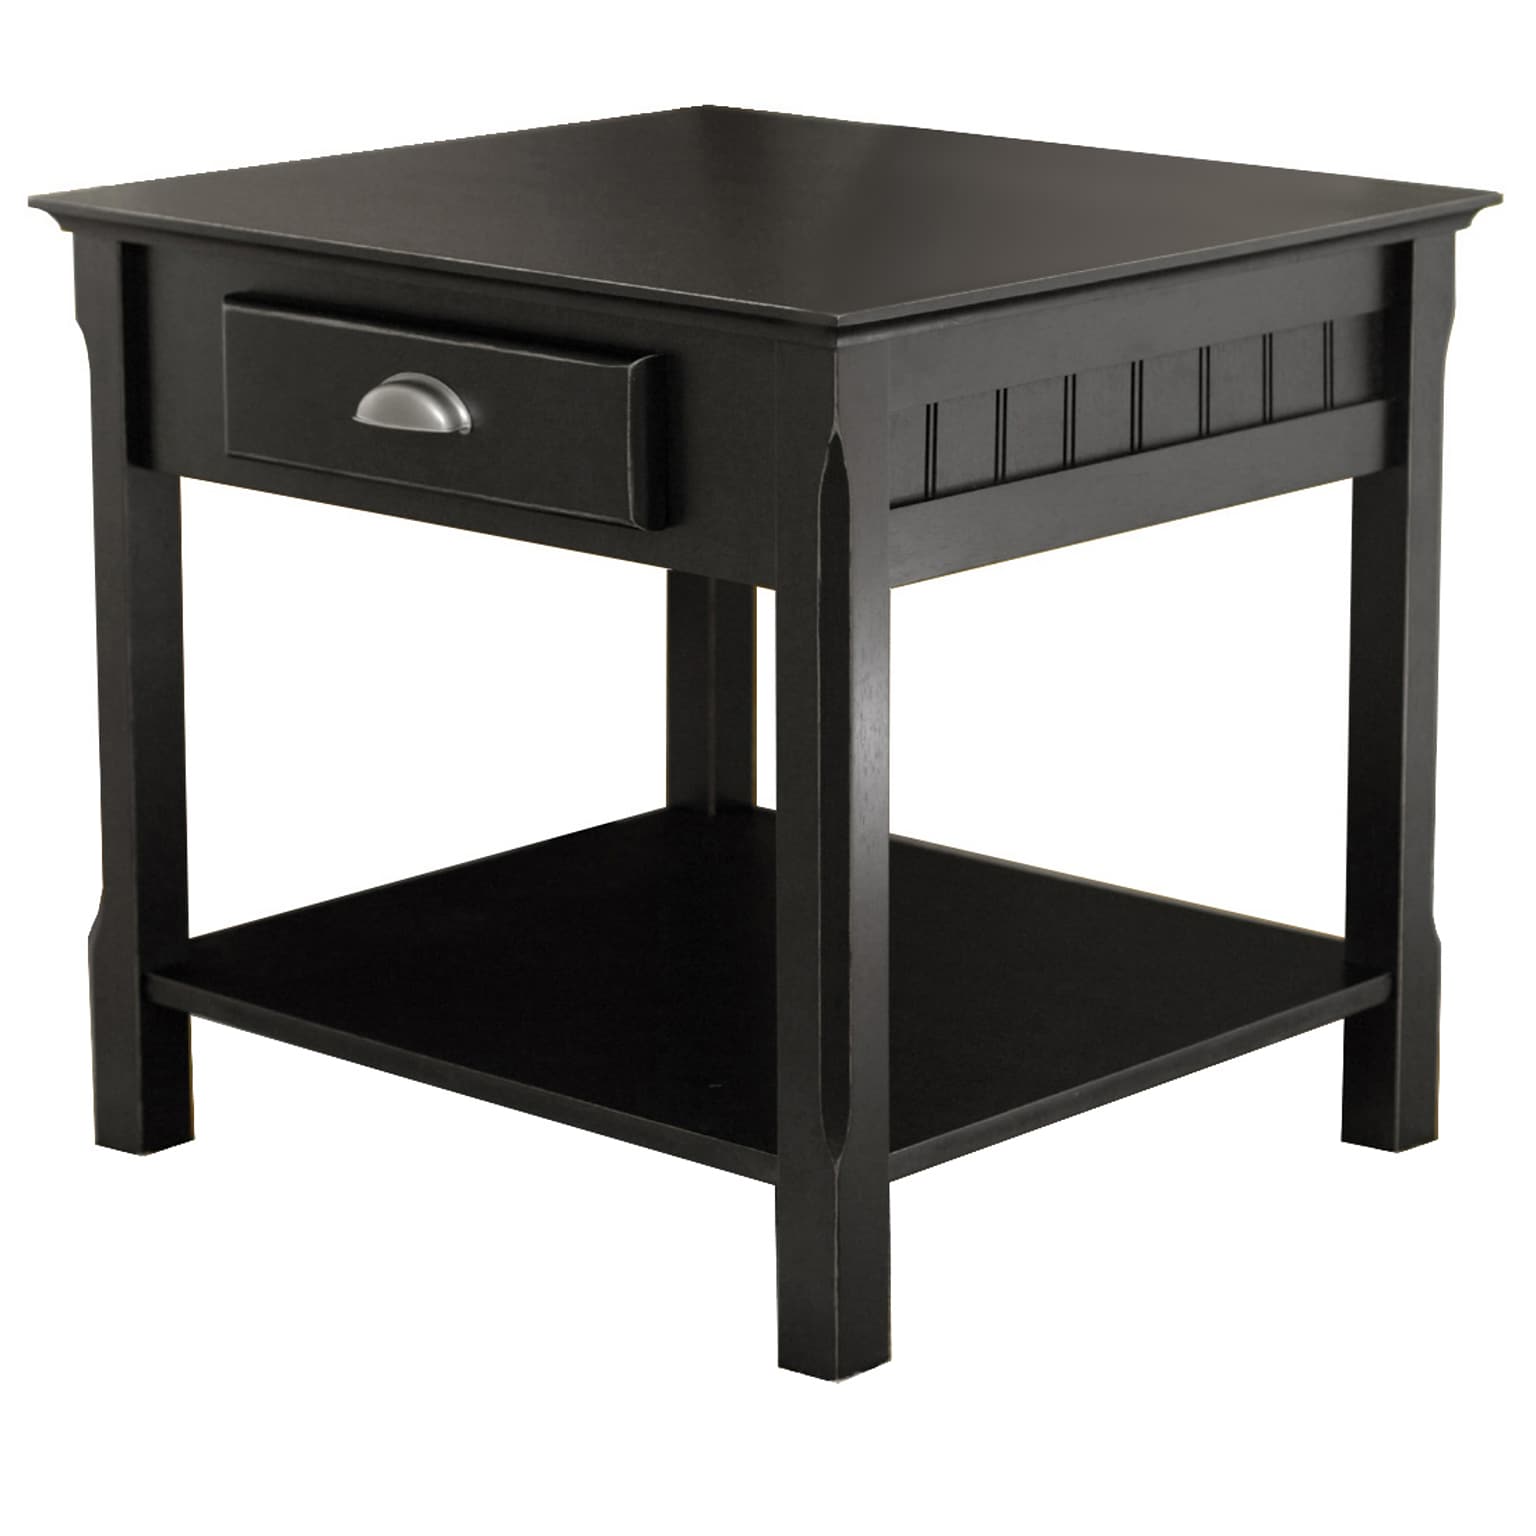 Winsome Timber 21.97 x 22.05 x 21.97 Solid Hard Wood End Table With one Drawer and Shelf, Black